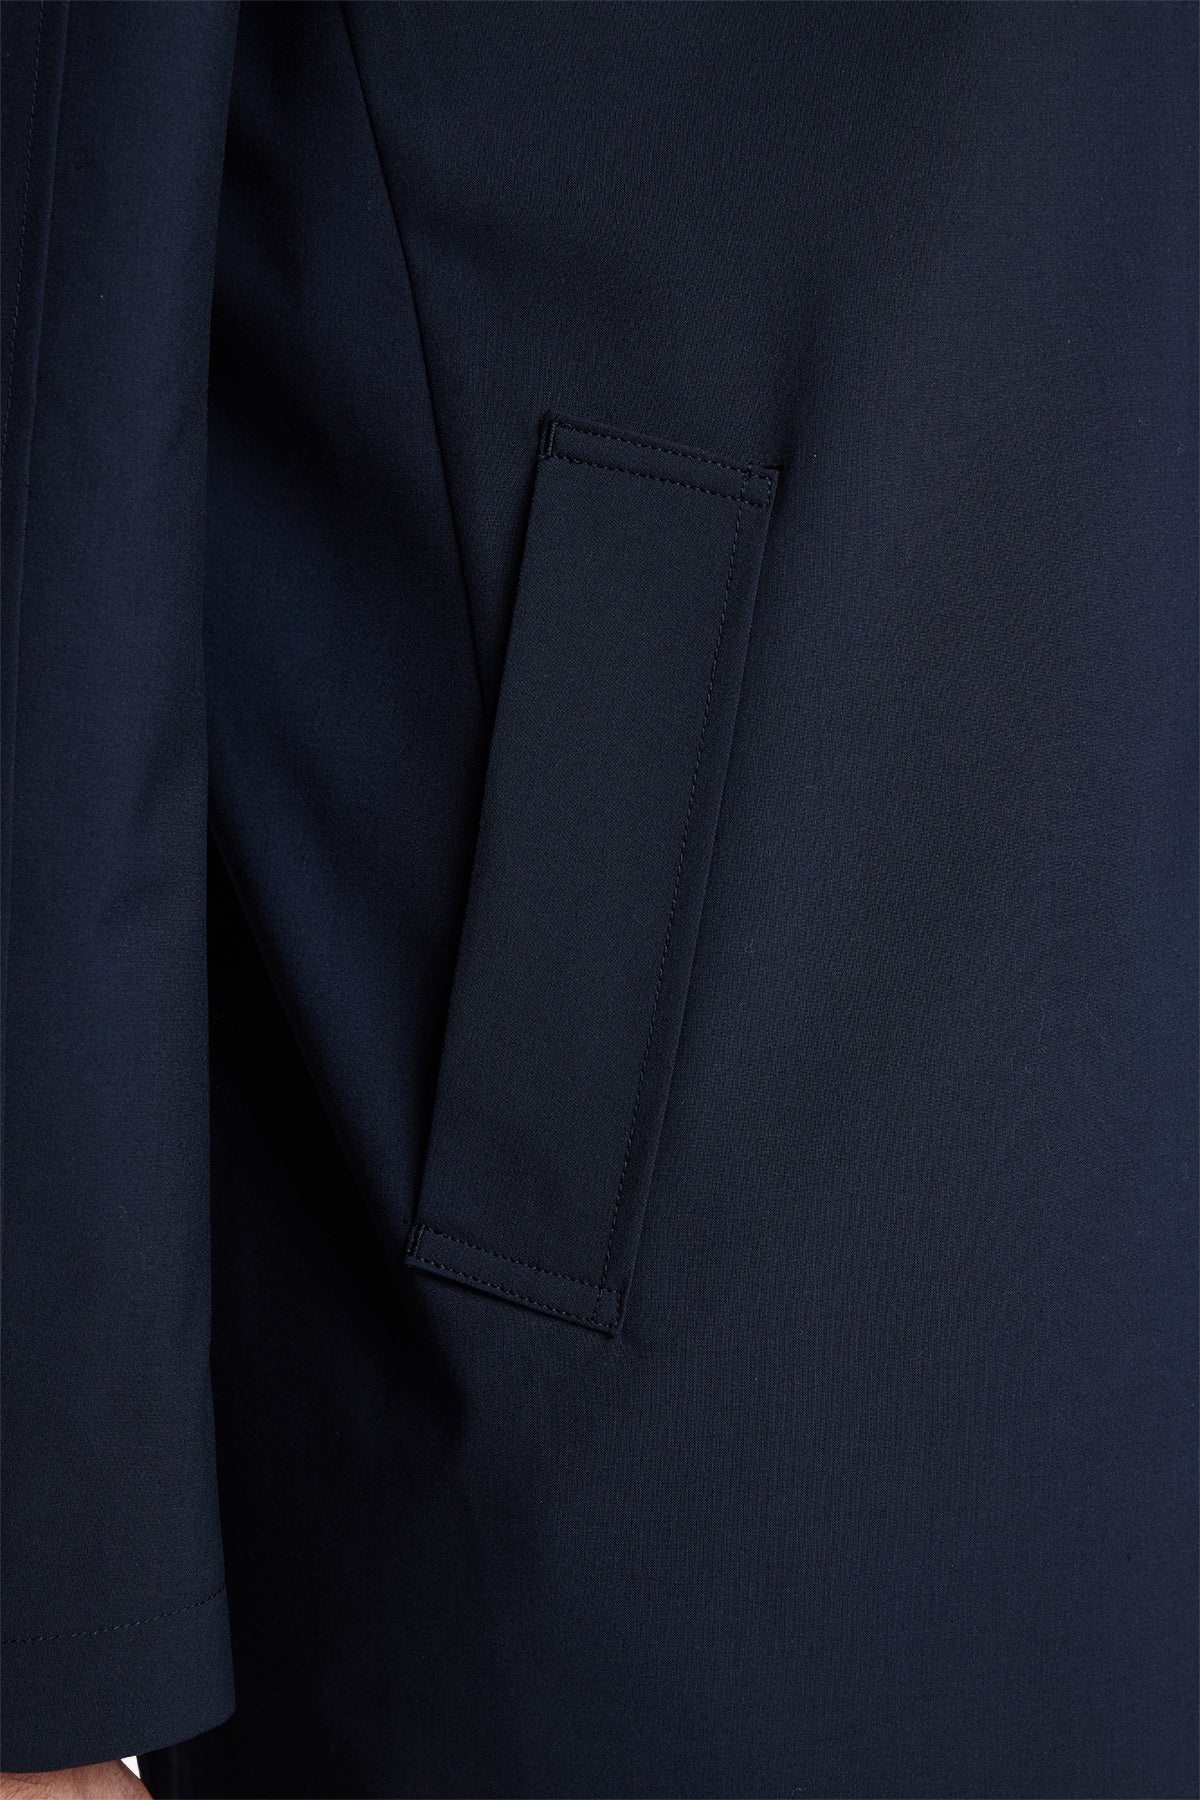 Trench - Navy Blue